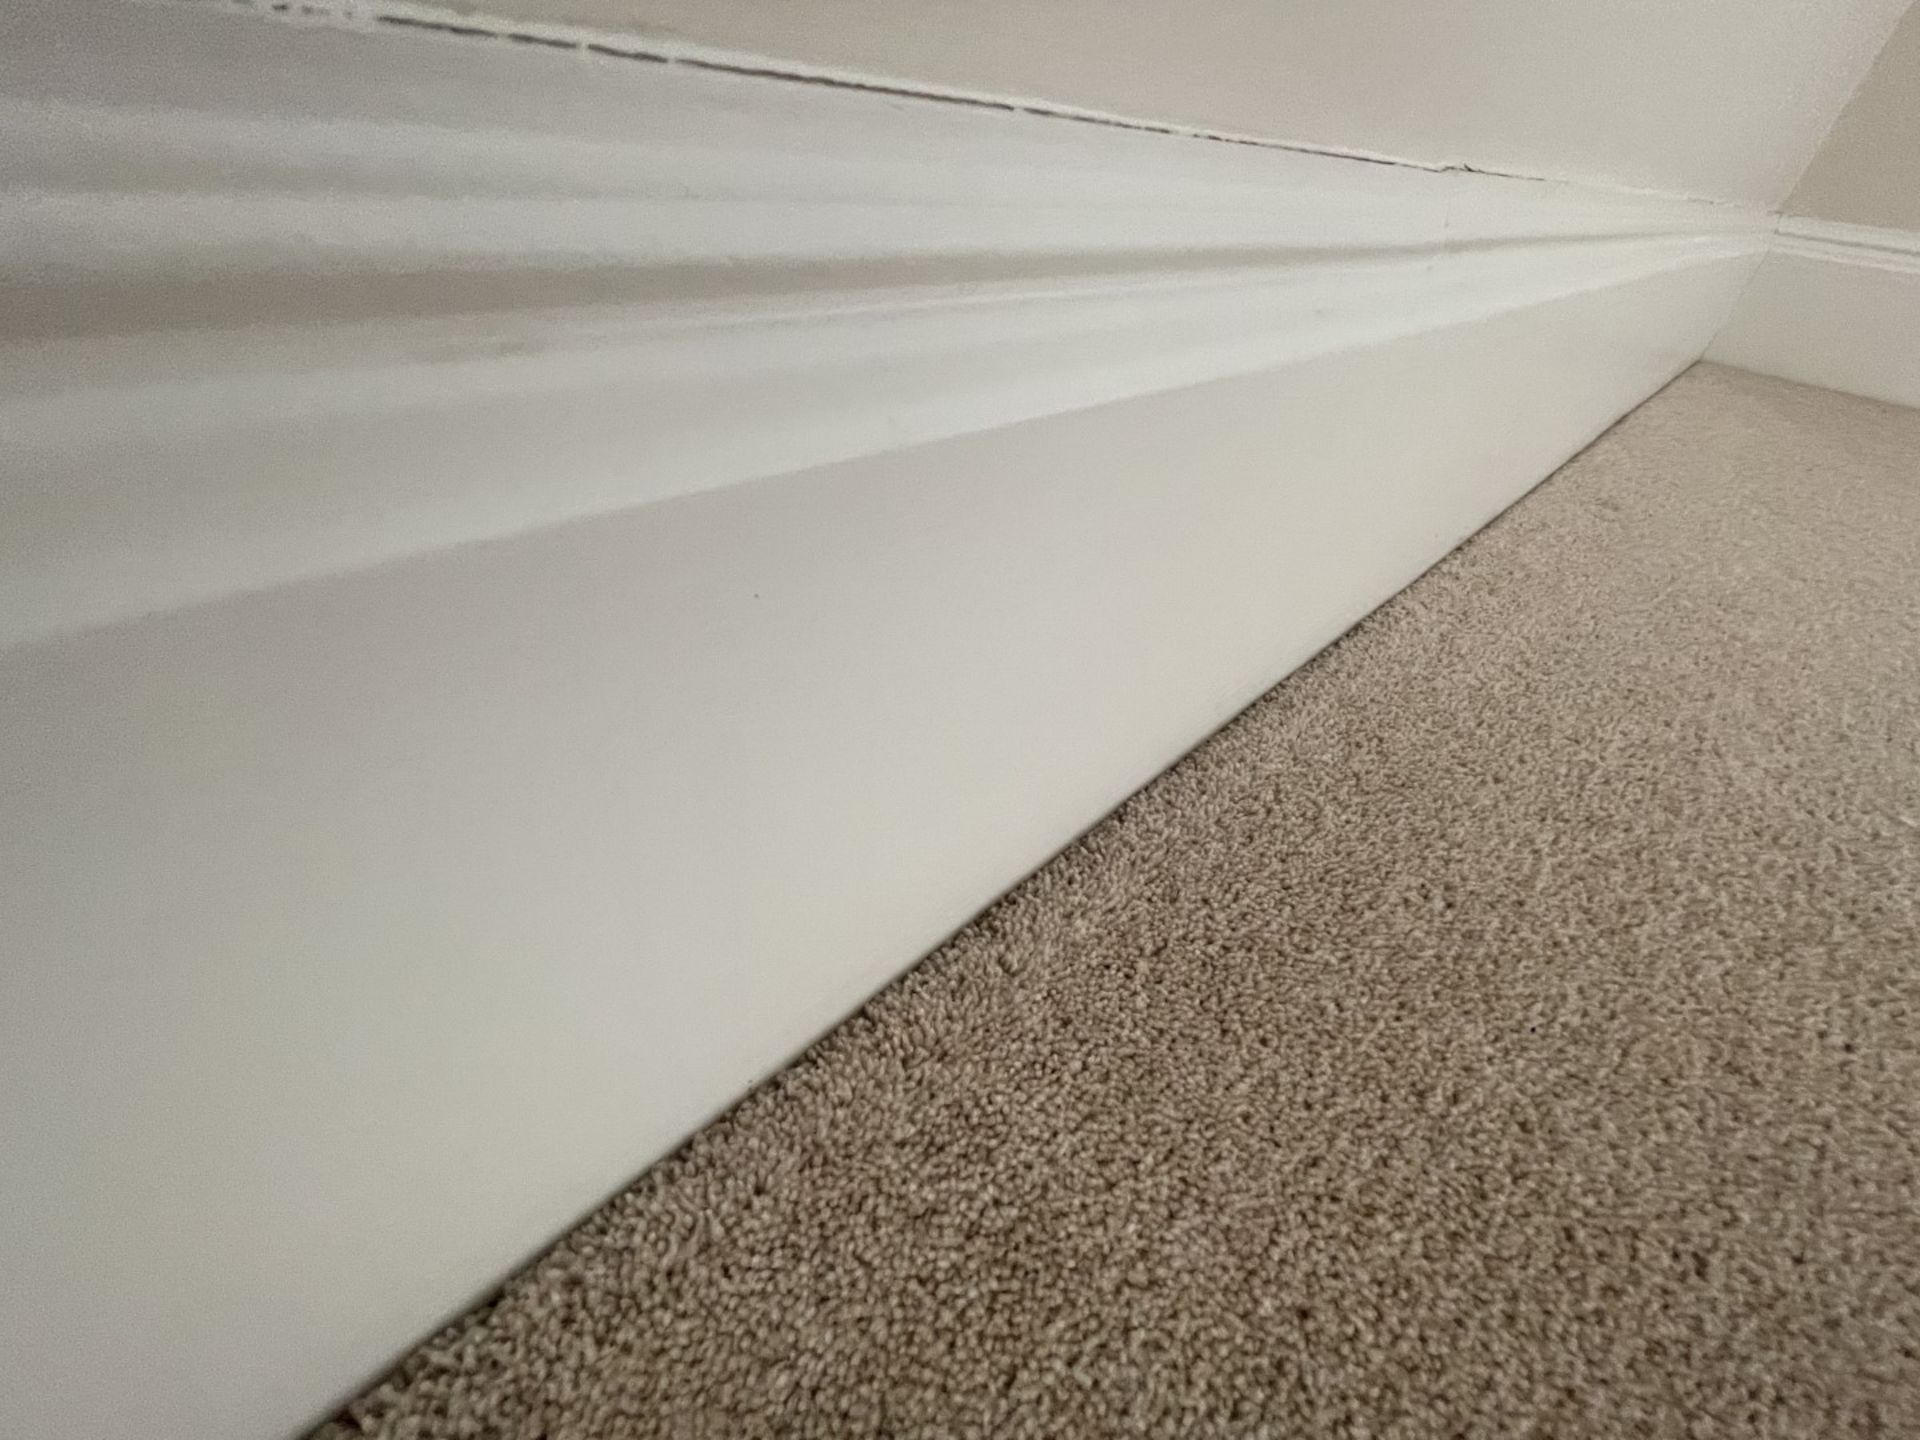 Approximately 20-Metres of Timber Wooden Skirting Boards, In White - Image 4 of 7